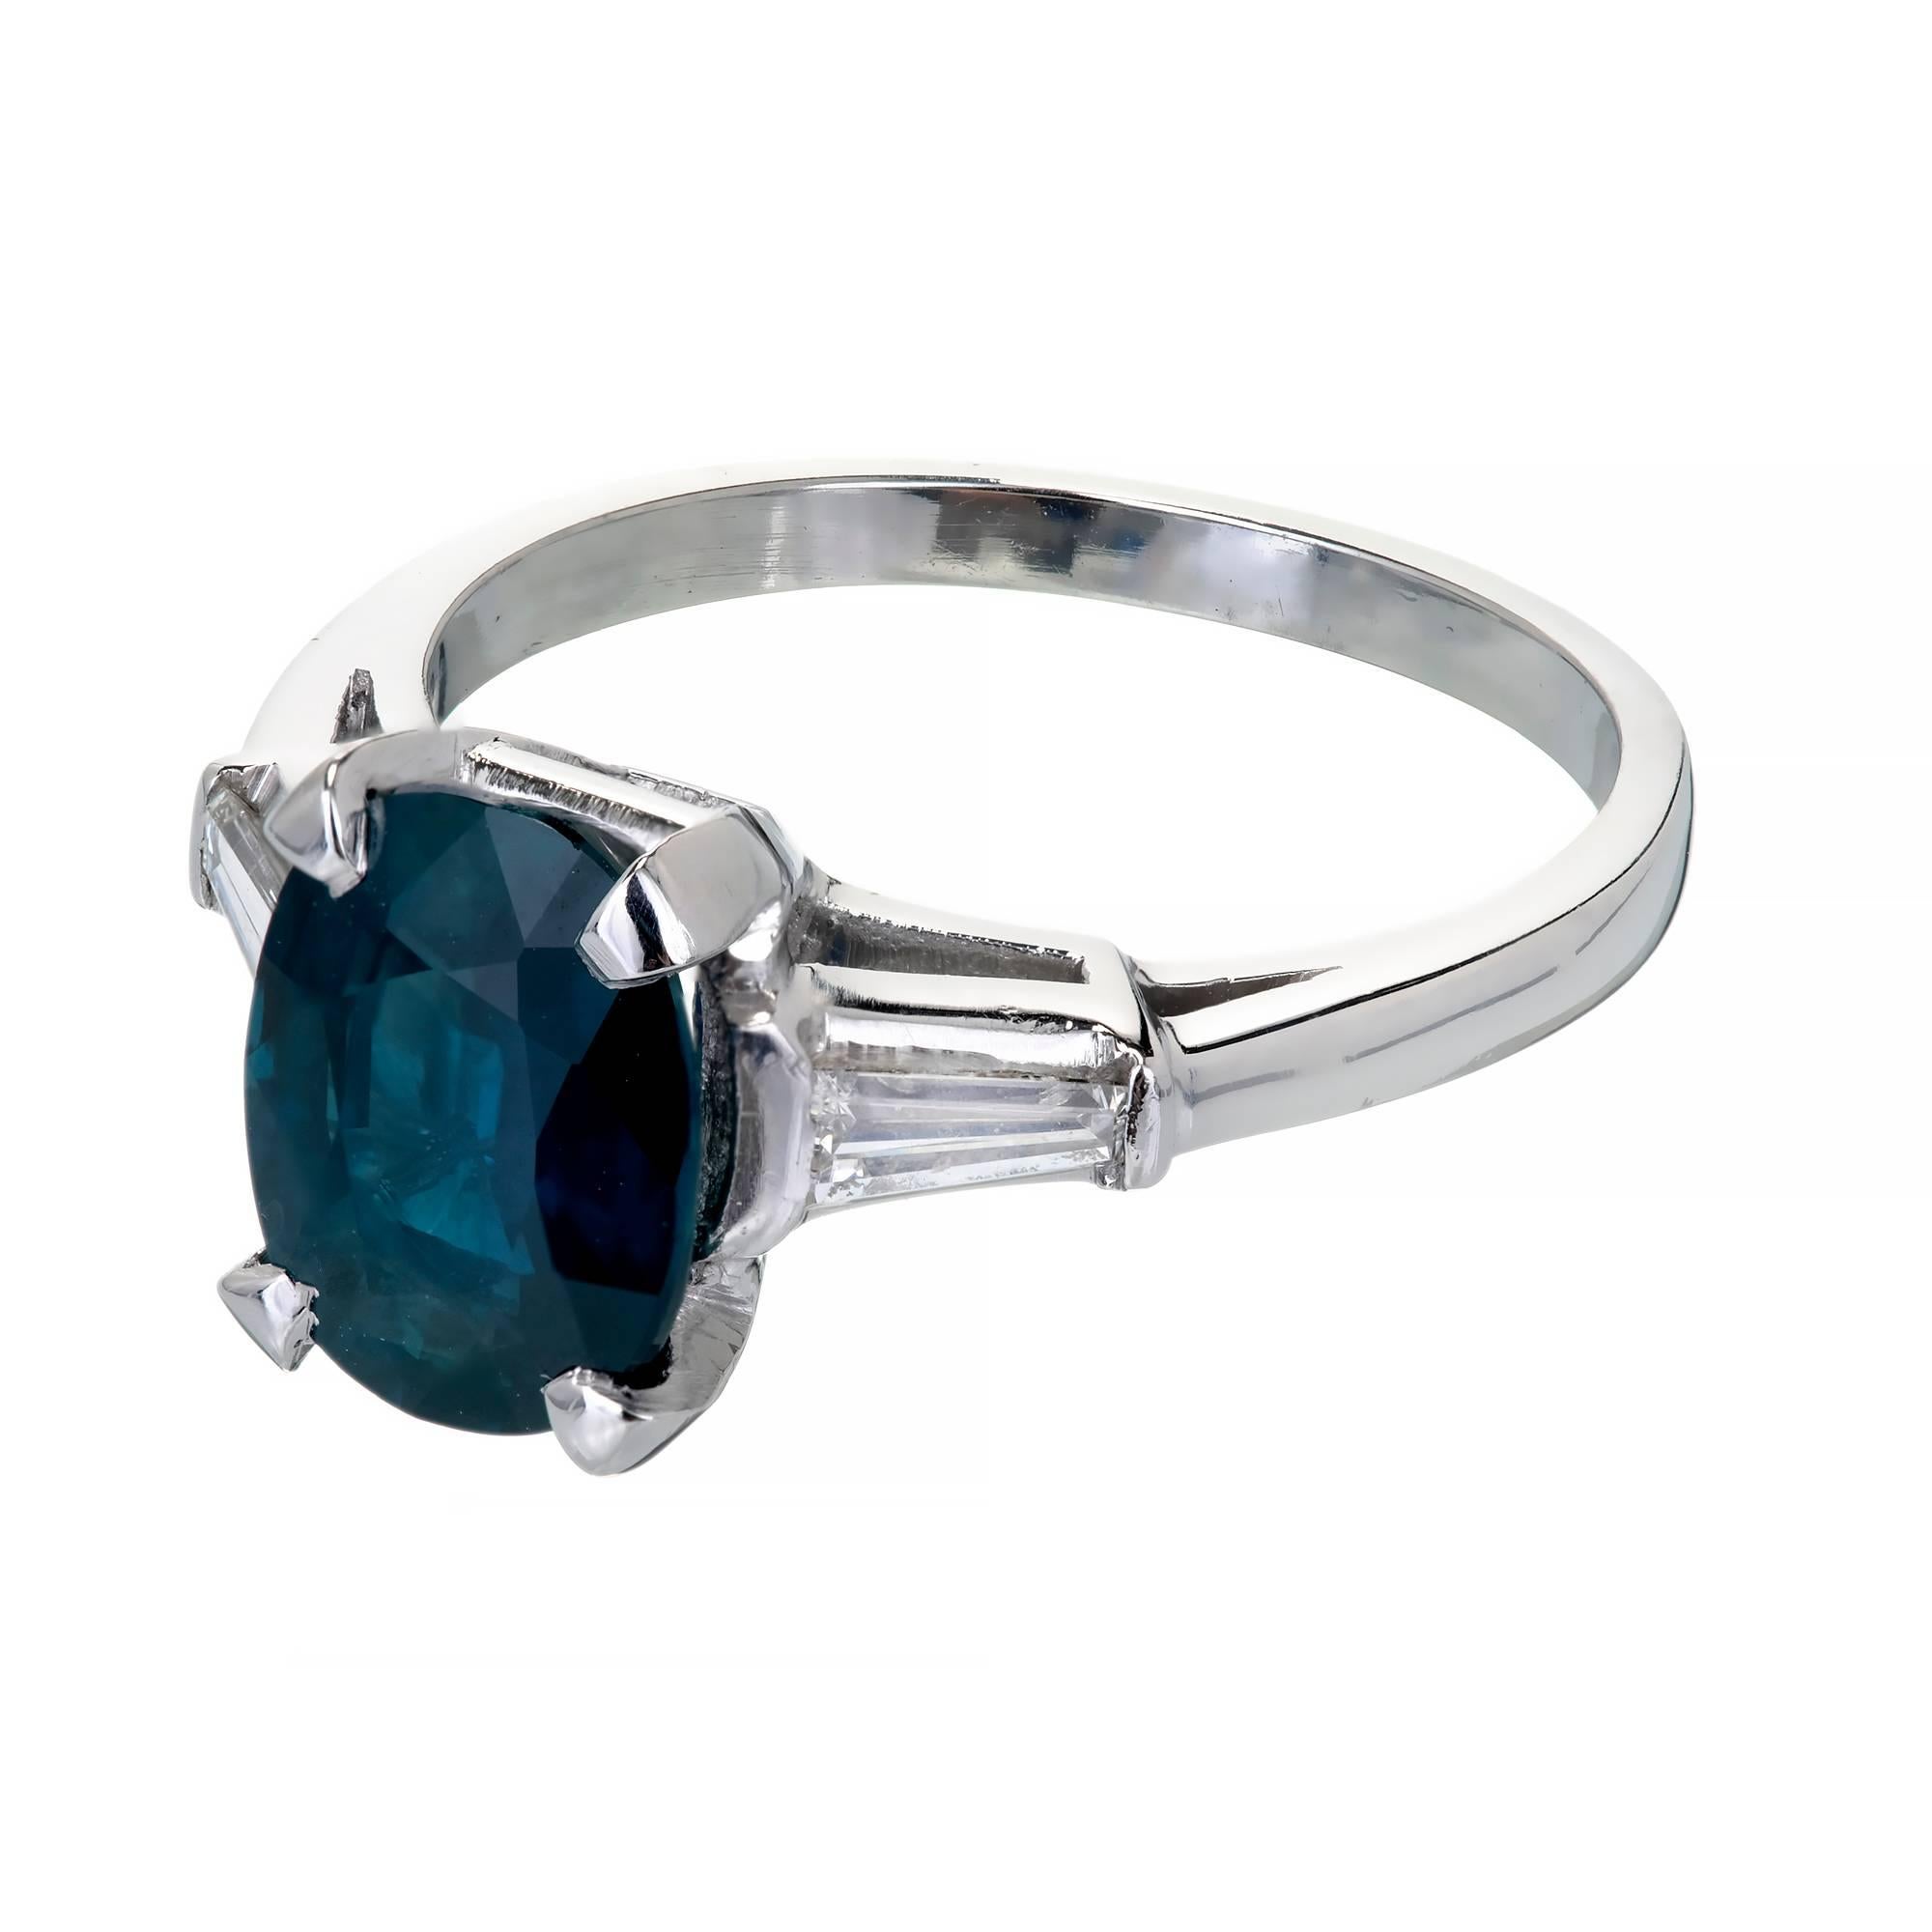 Vintage 1950 three-stone Platinum engagement ring with a deep blue 3.01ct GIA certified natural no heat oval Sapphire and tapered baguette Diamond accents.

1 oval blue Sapphire, approx. total weight 3.01cts, MI, natural no heat, 9.63 x 7.32 x